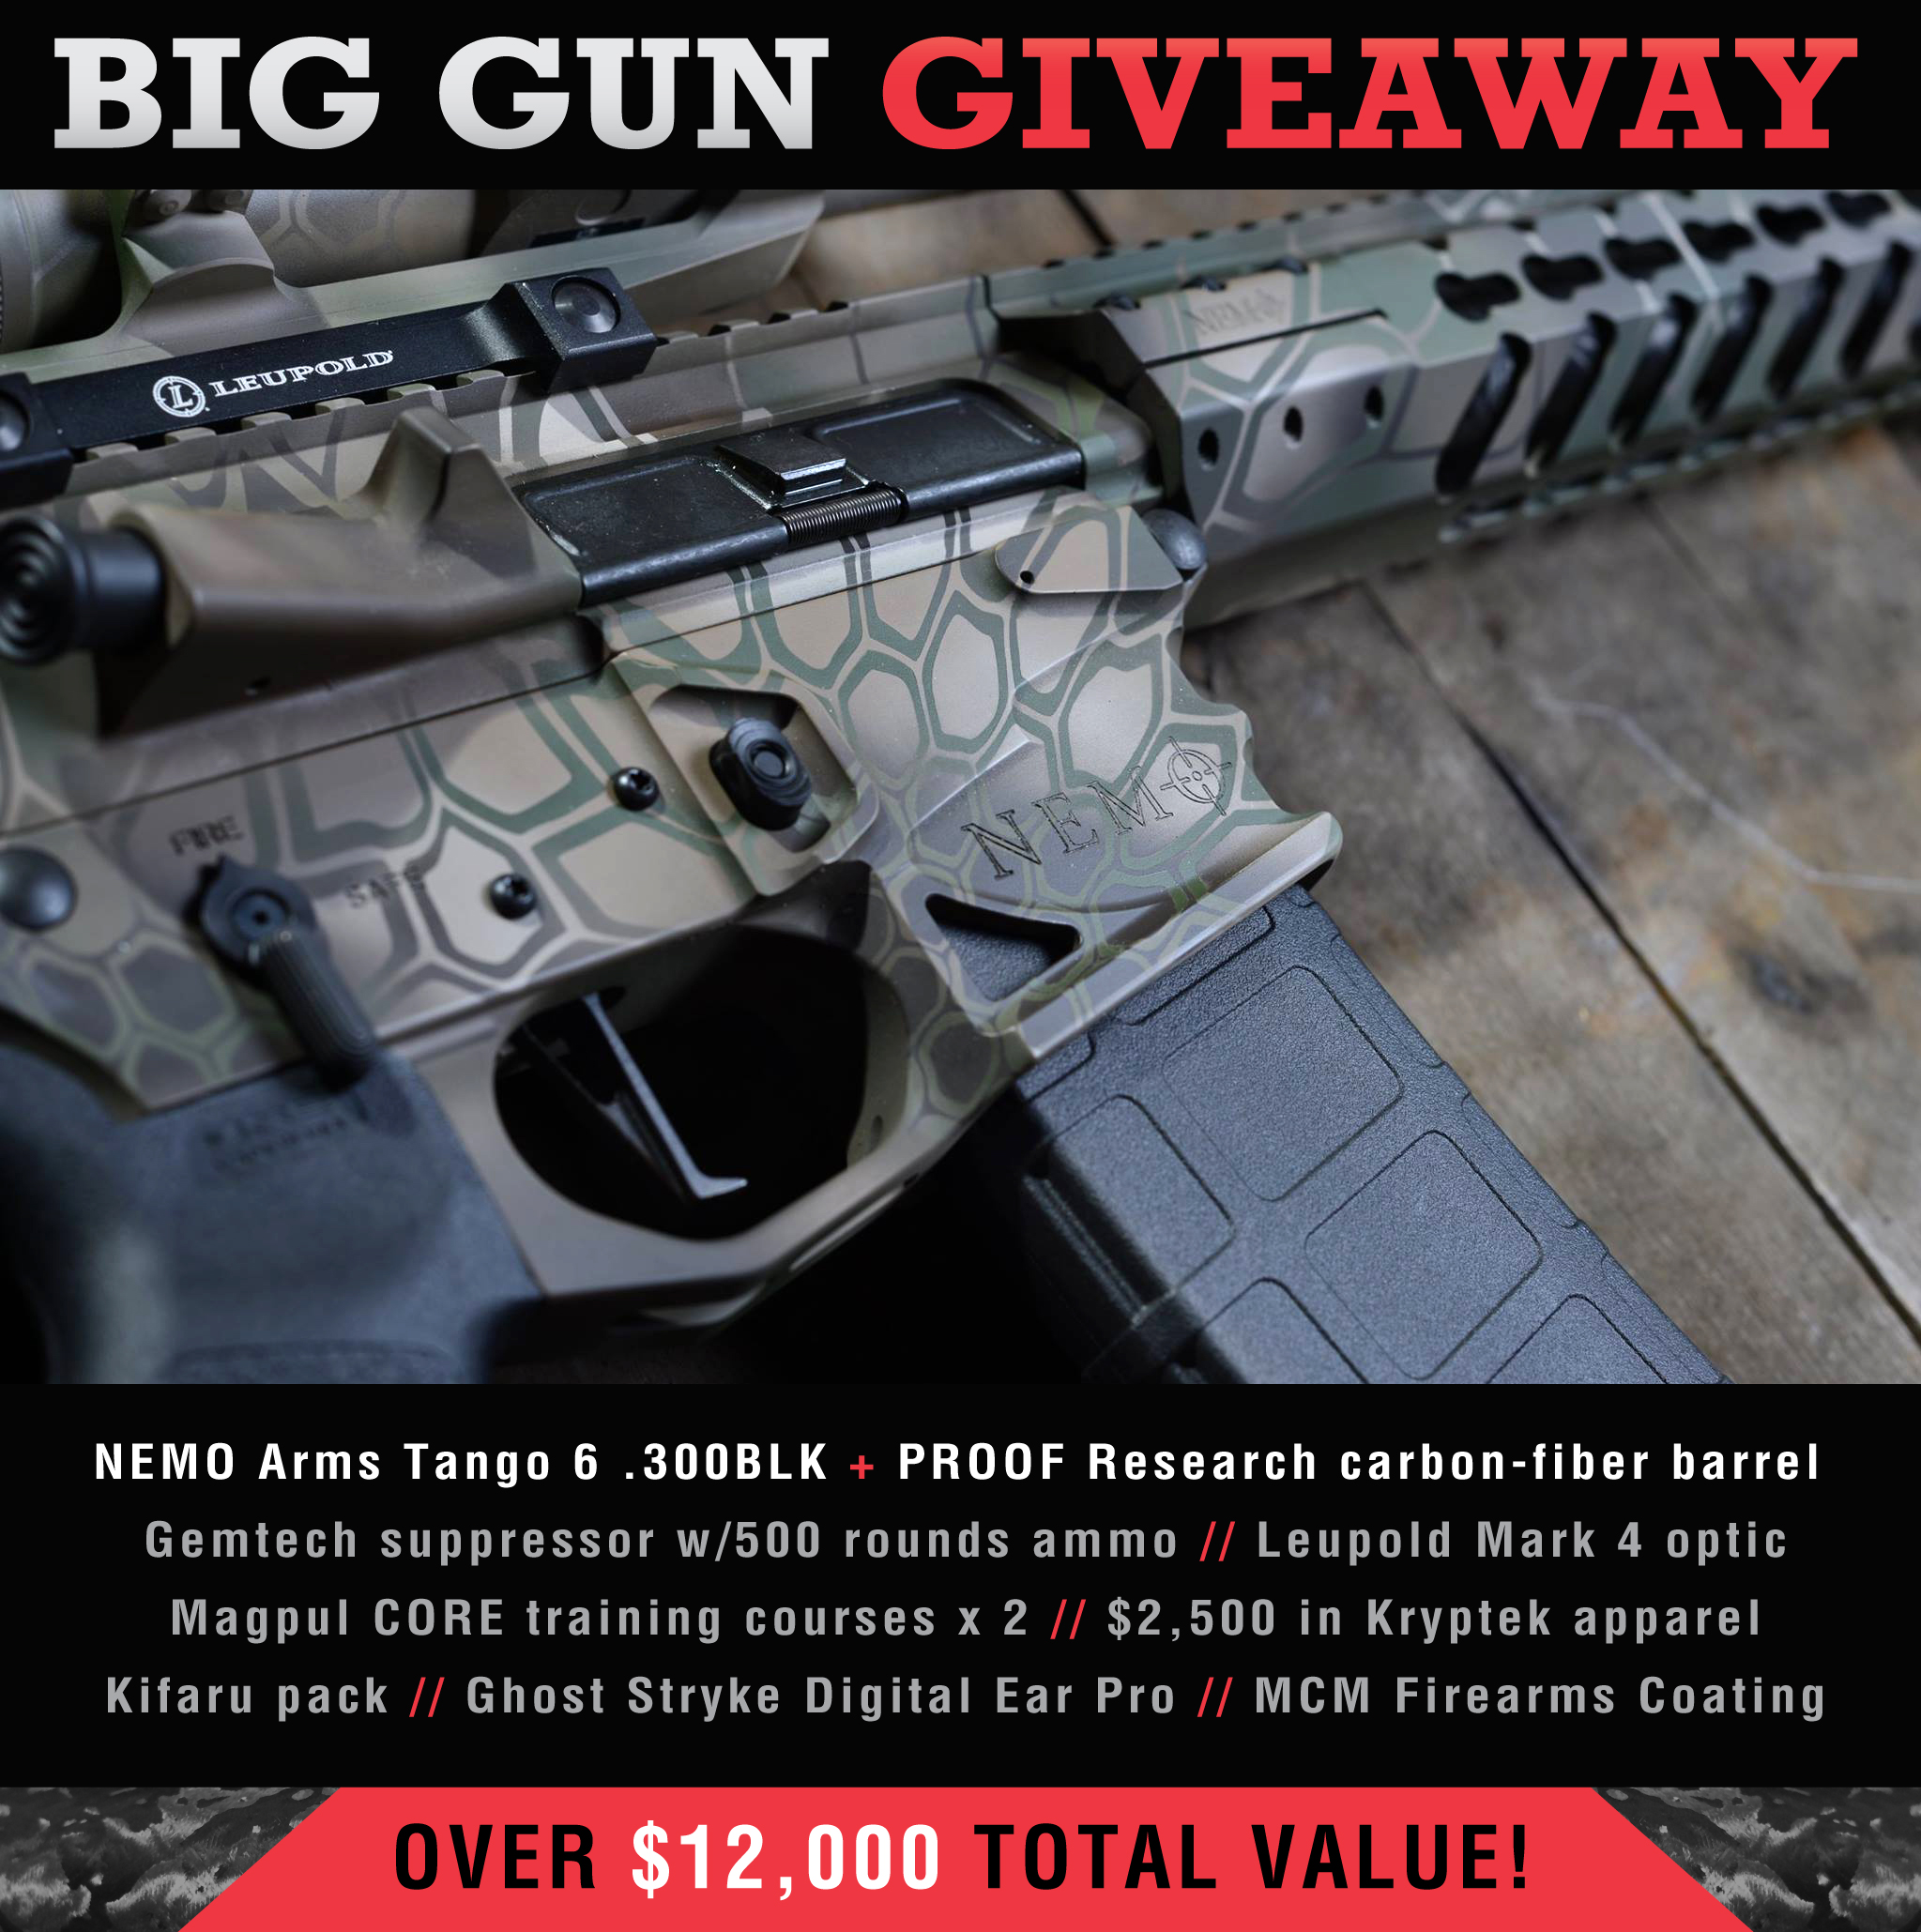 Proof Research, Gemtech, Kryptek, Nemo Arms, Magpul and others team up for FB Gun Giveaway